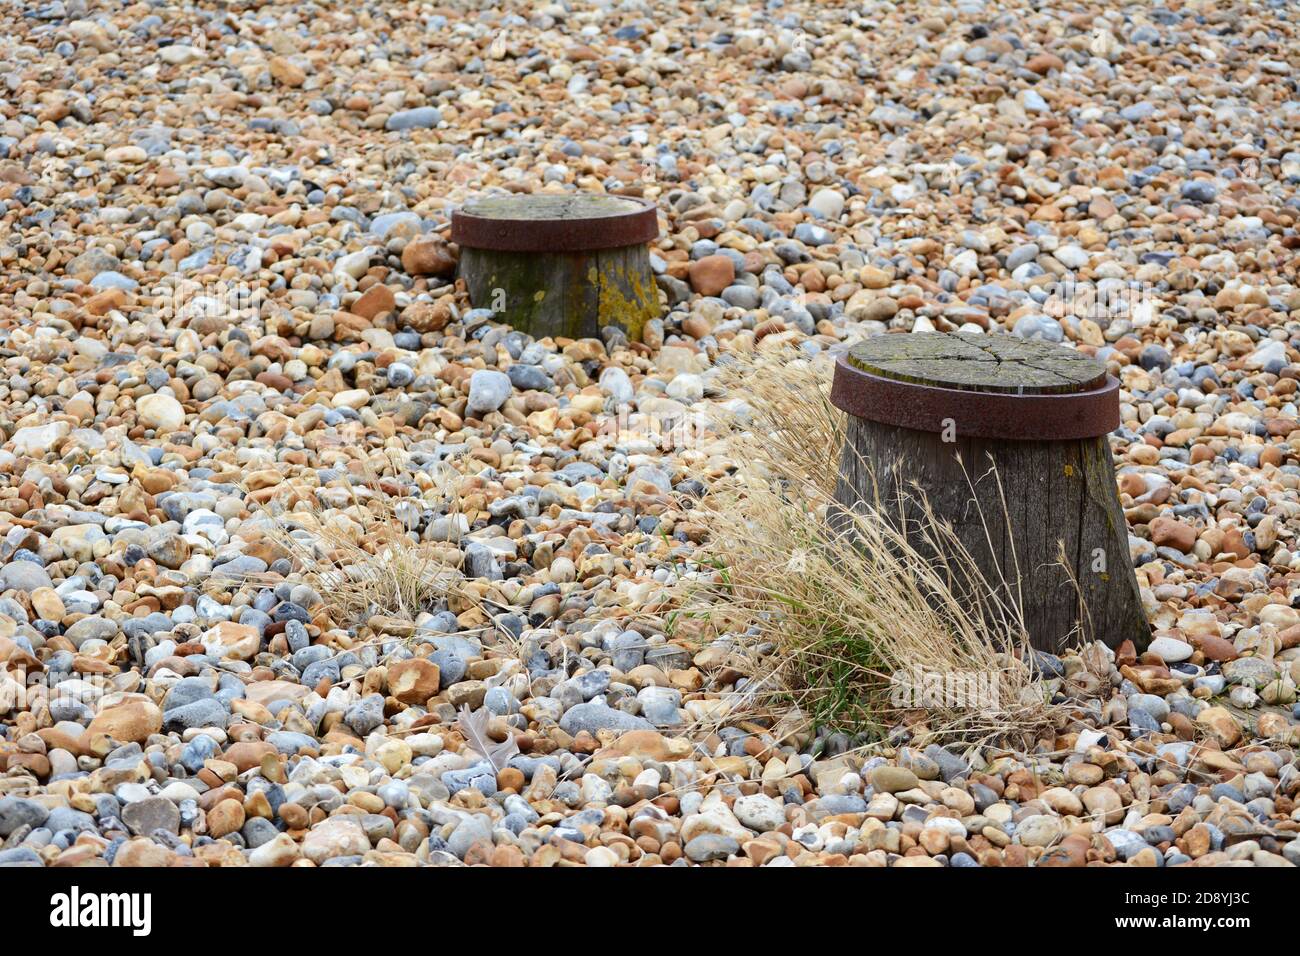 Tops of two groyne sea defences visible on a shingle beach, with dry sea grasses growing among the pebbles Stock Photo